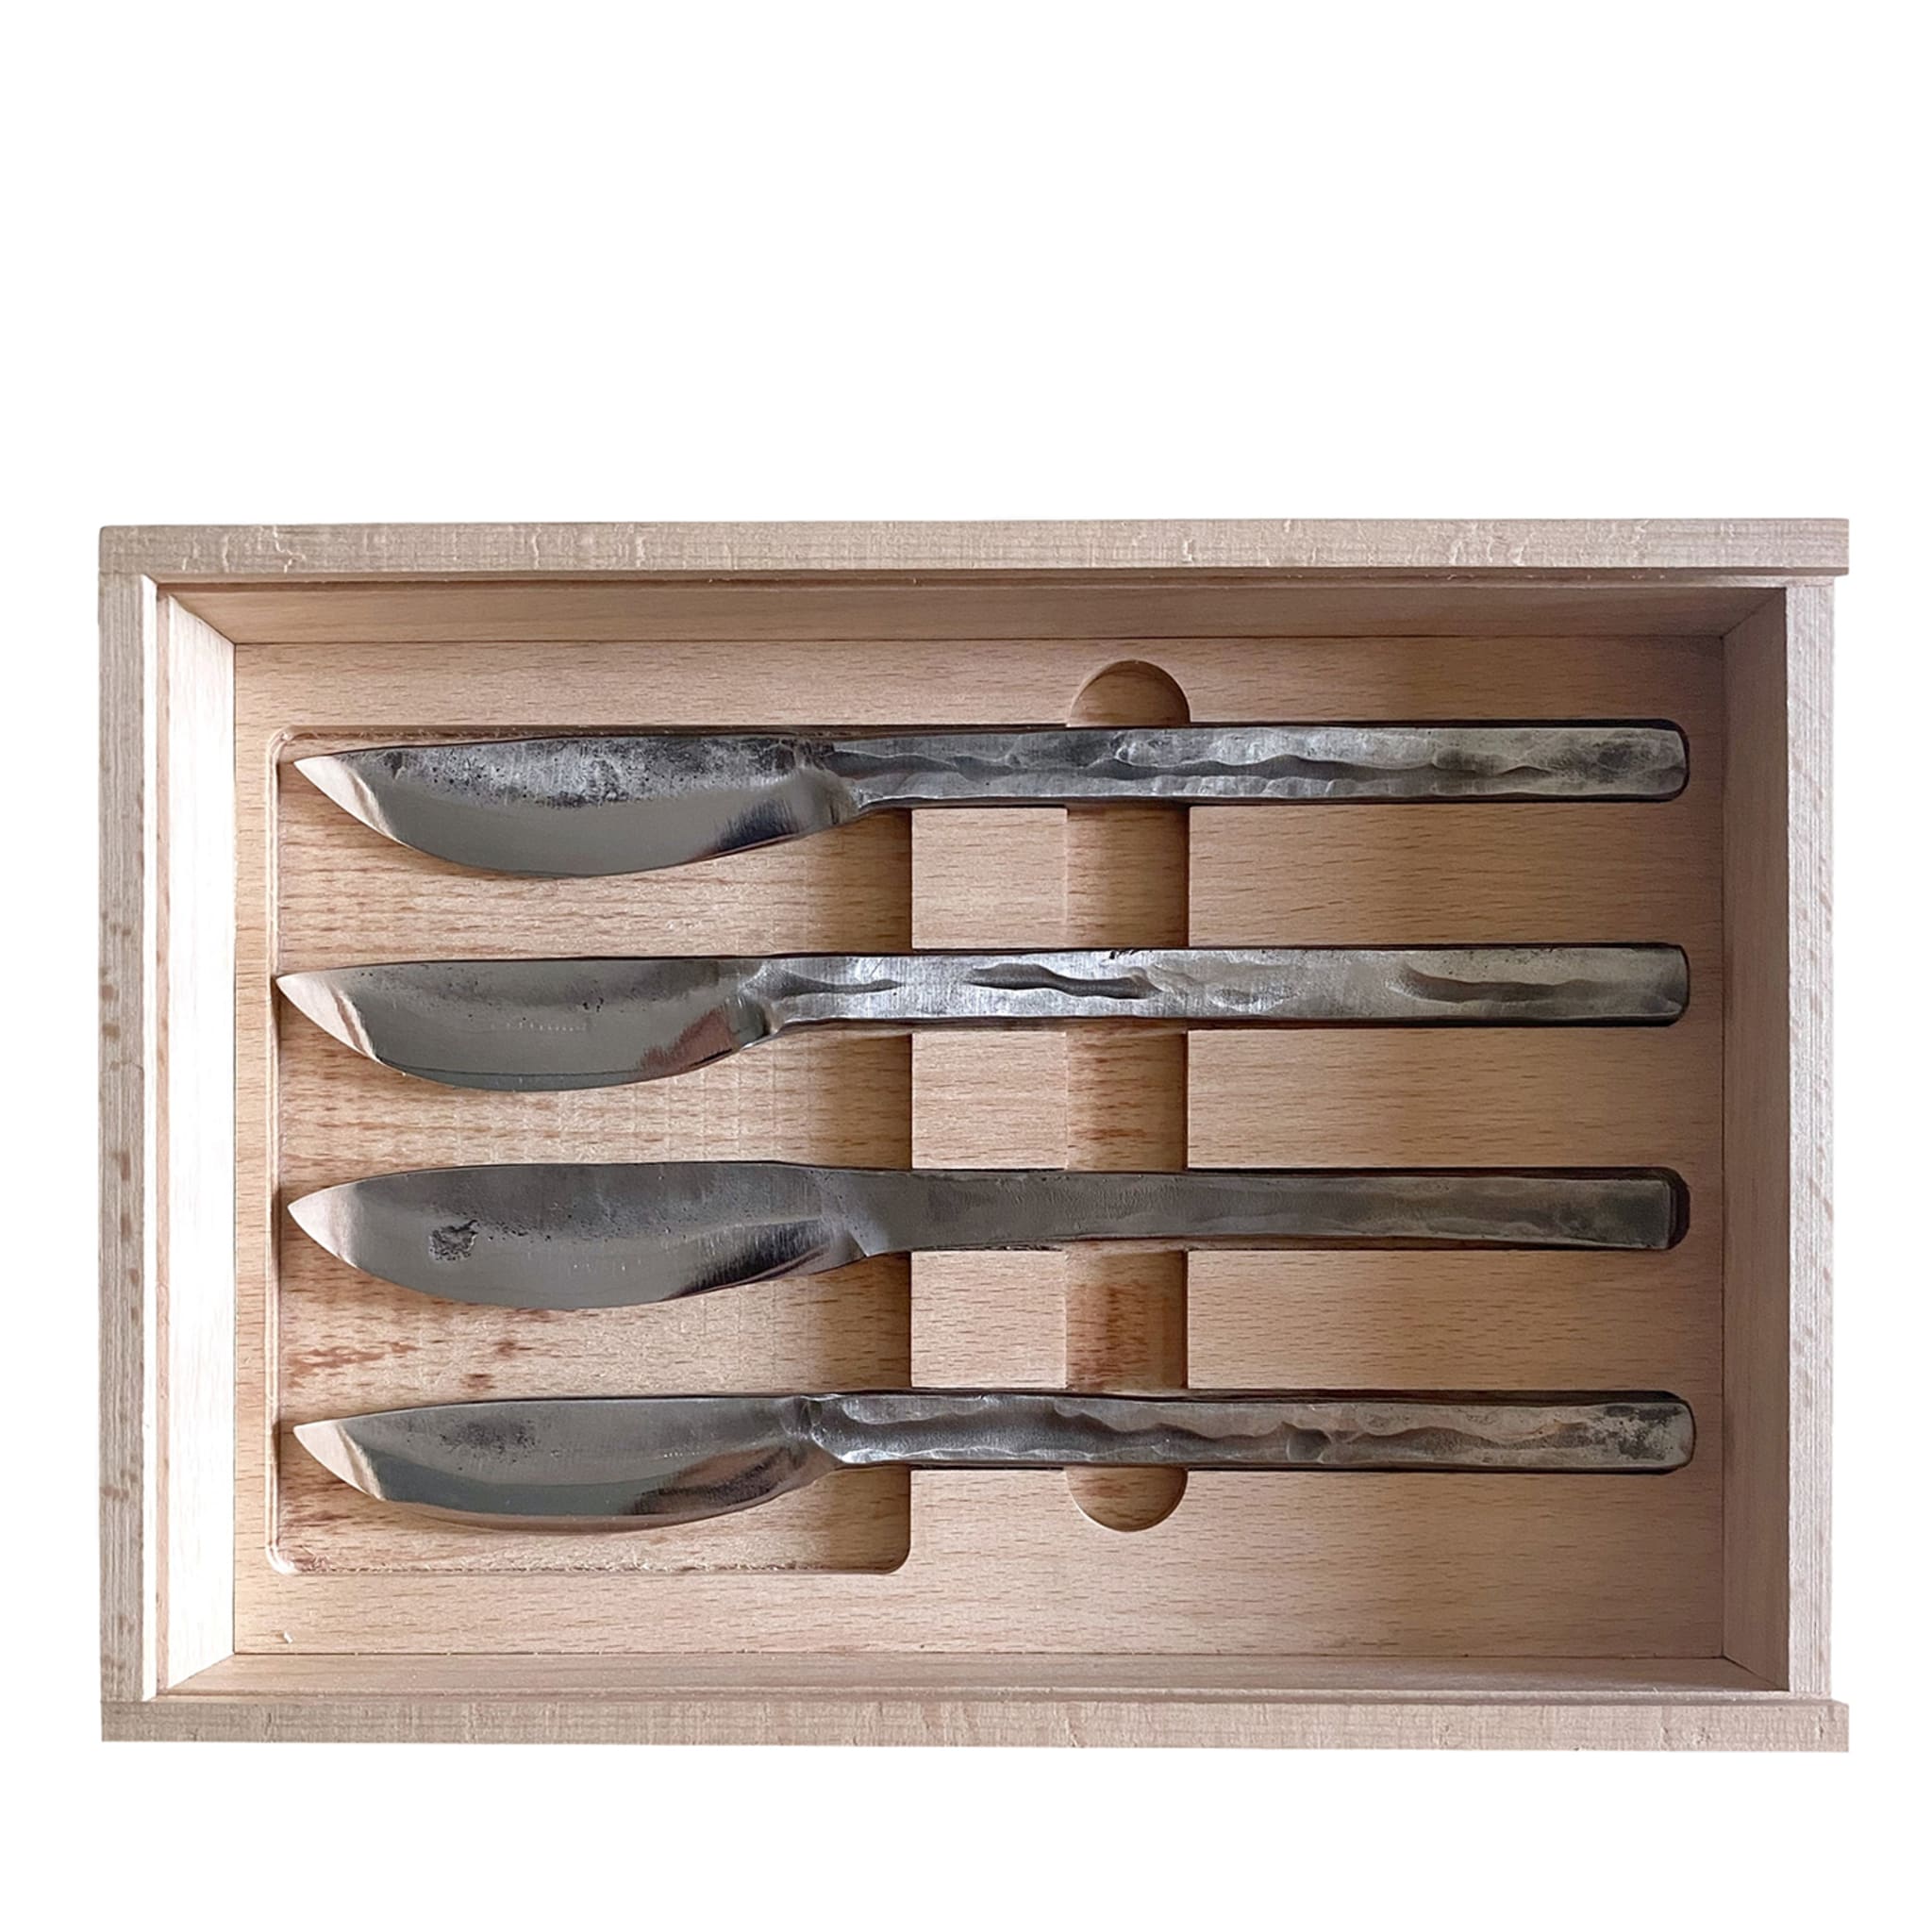 Rude Set of 4 Table Knives - Main view